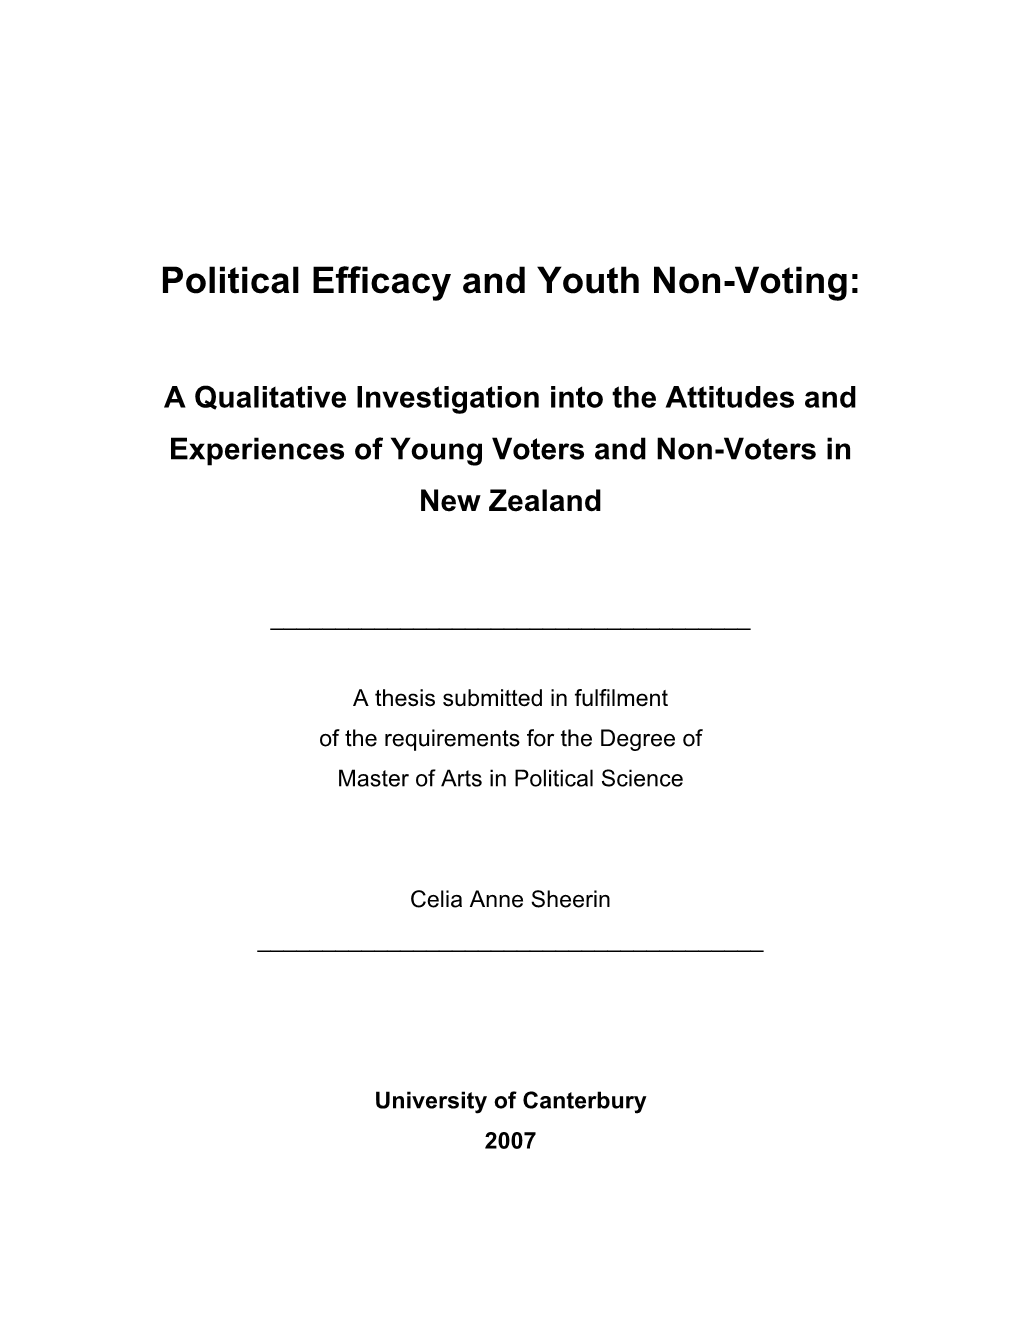 Political Efficacy and Youth Non-Voting